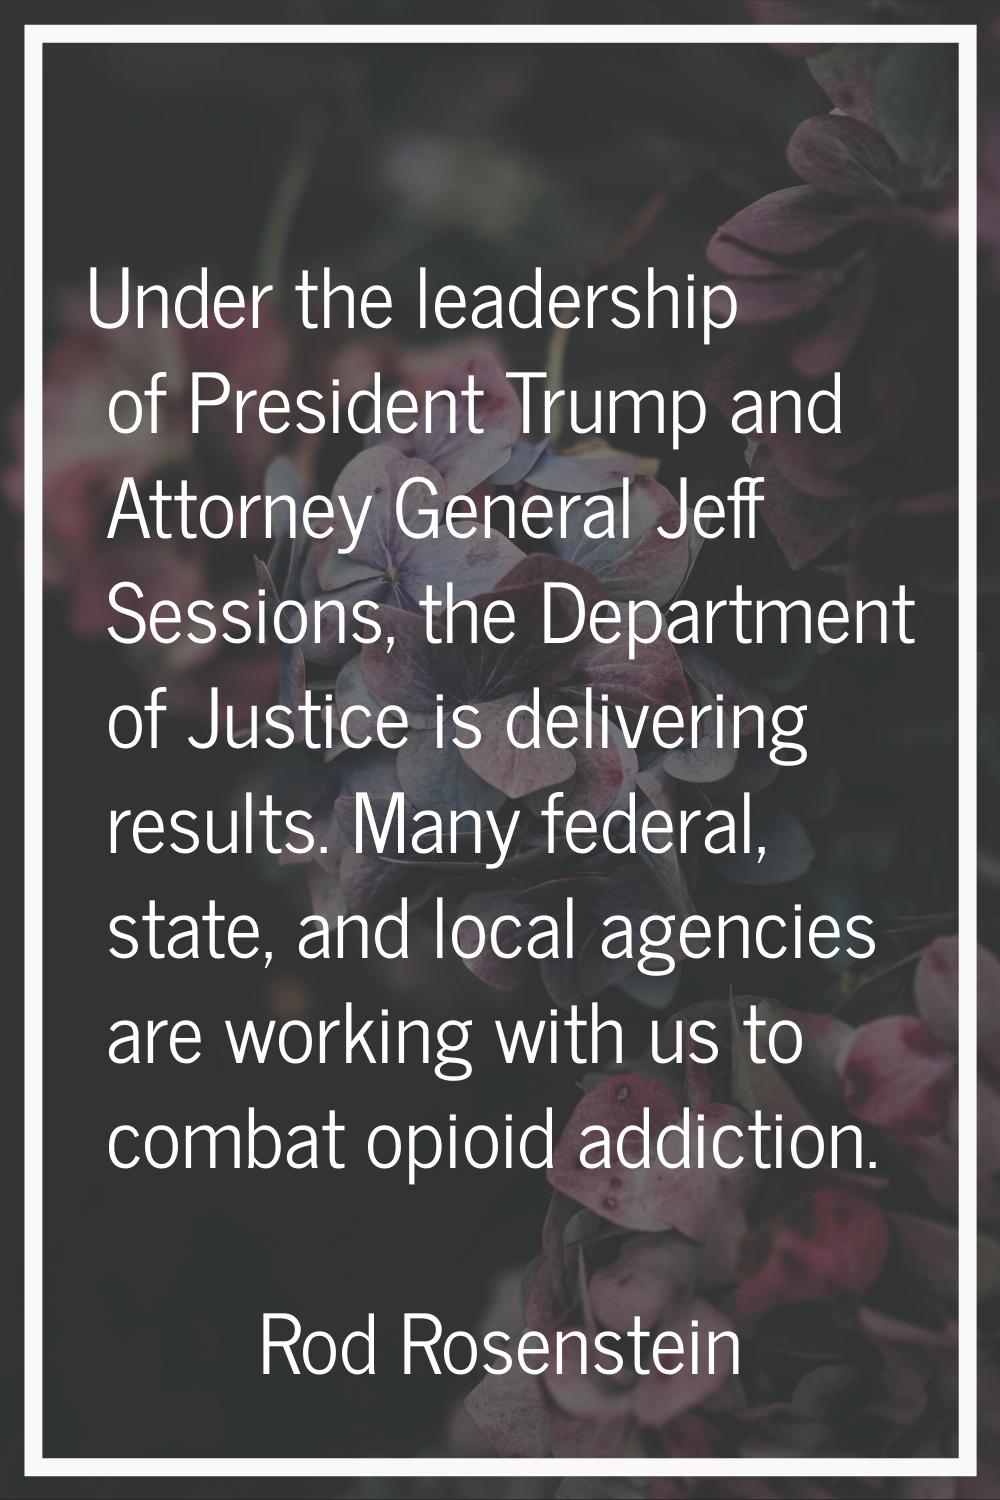 Under the leadership of President Trump and Attorney General Jeff Sessions, the Department of Justi